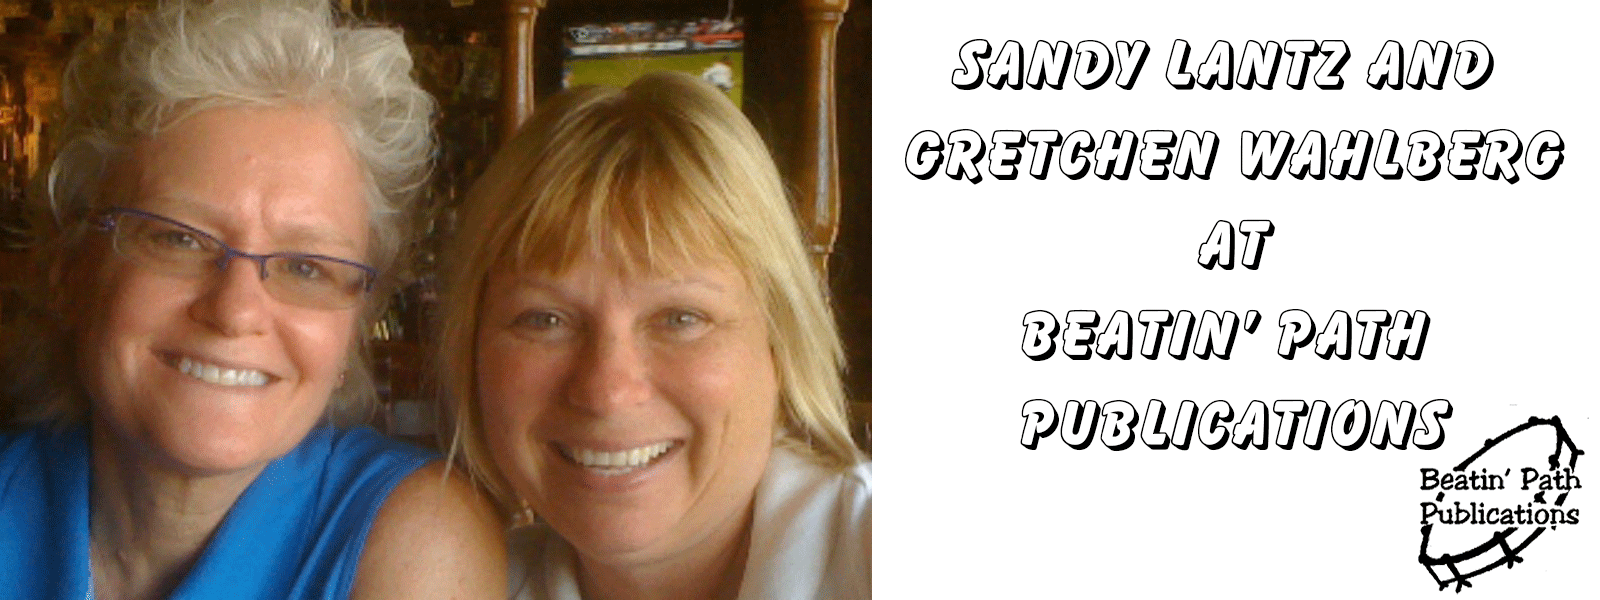 Sandy Lantz and Gretchen Wahlberg at Beatin' Path Publications